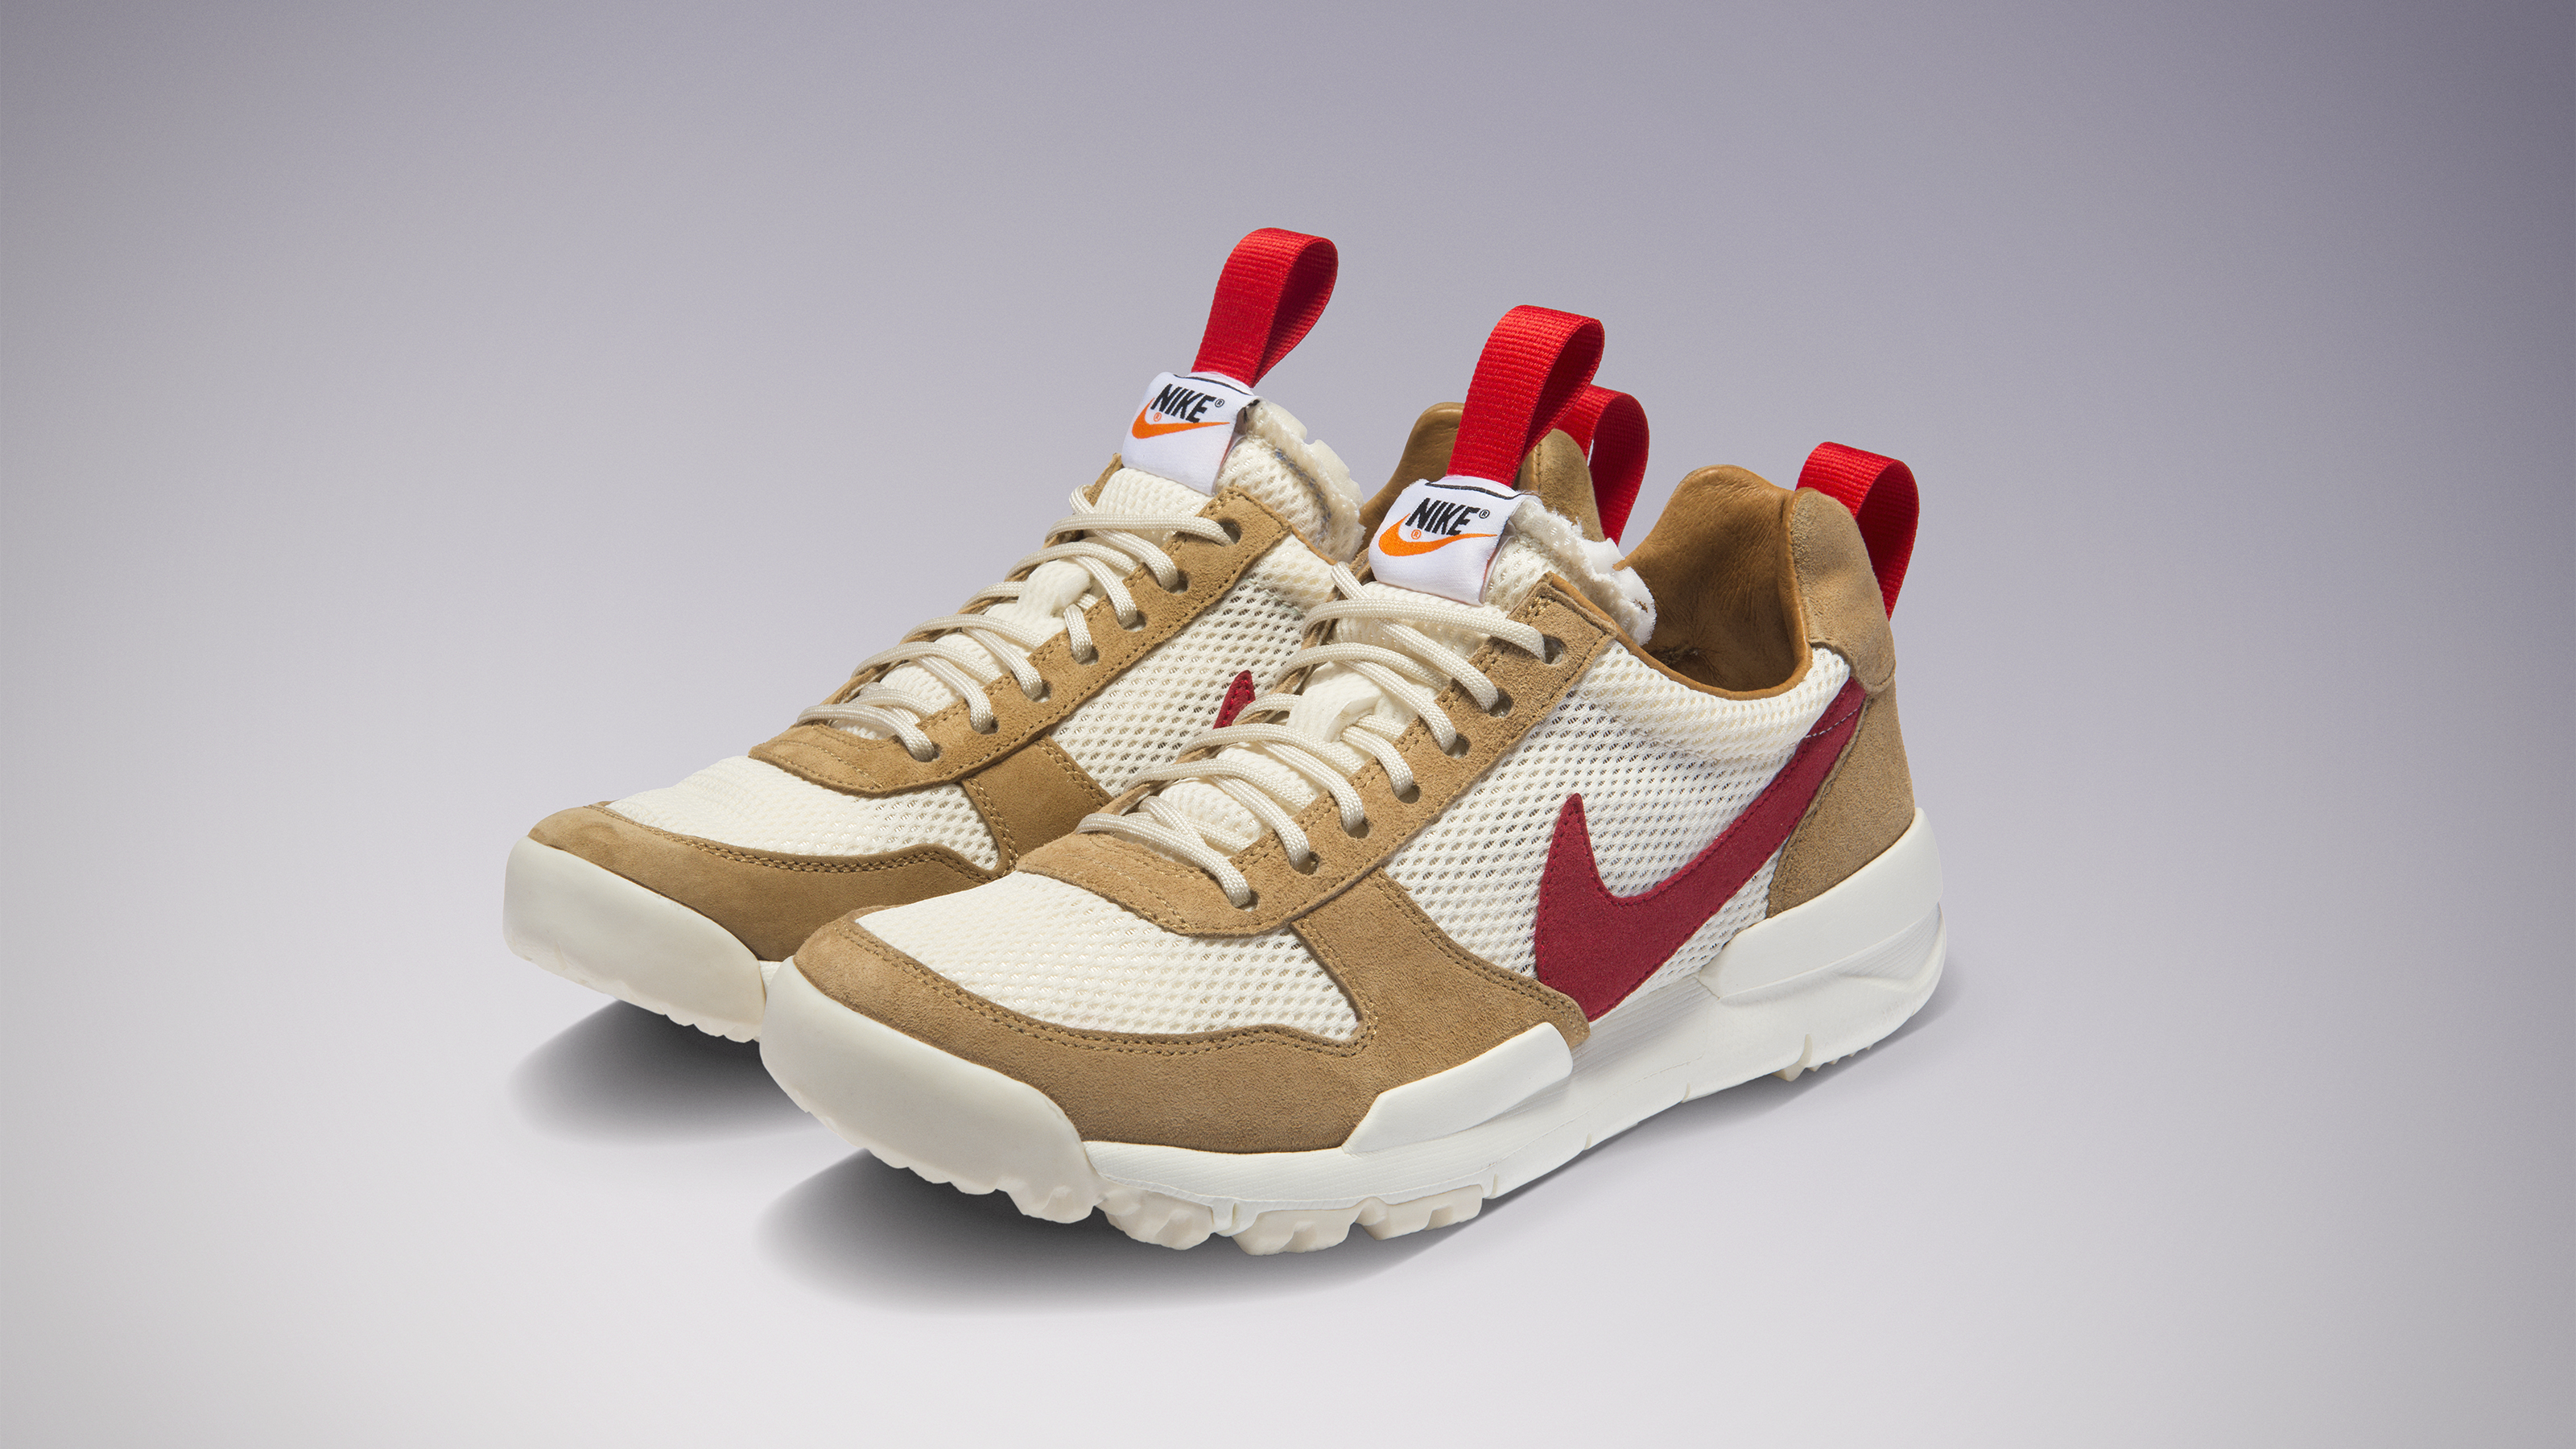 Nike Teams Up With Tom Sachs for More Space-Inspired Sneakers